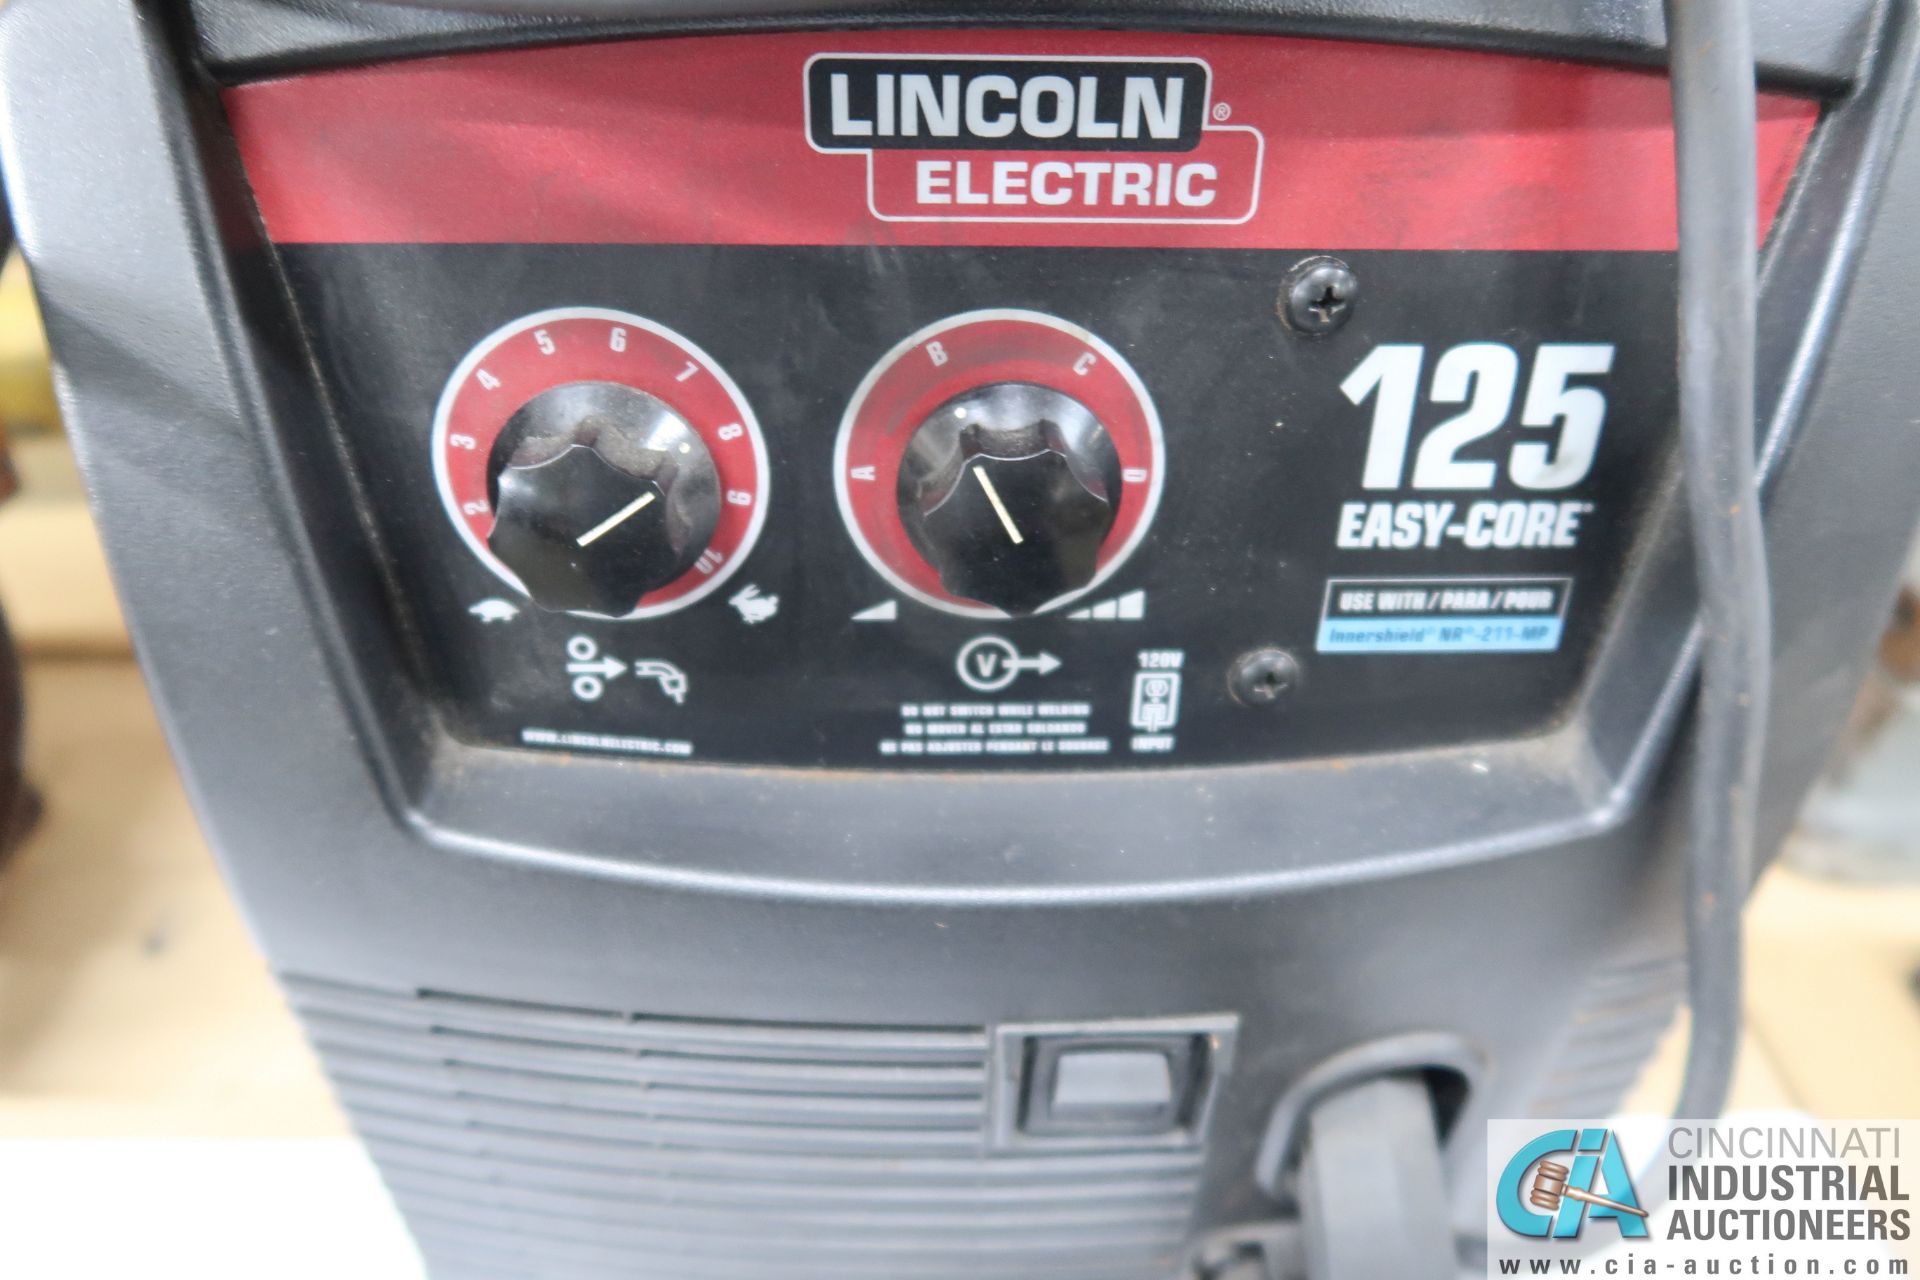 LINCOLN ELECTRIC 125 EASY CORE MIG WELDING POWER SOURCE; S/N M3170402128, WITH BUILT IN WIRE FEEDER, - Image 2 of 2